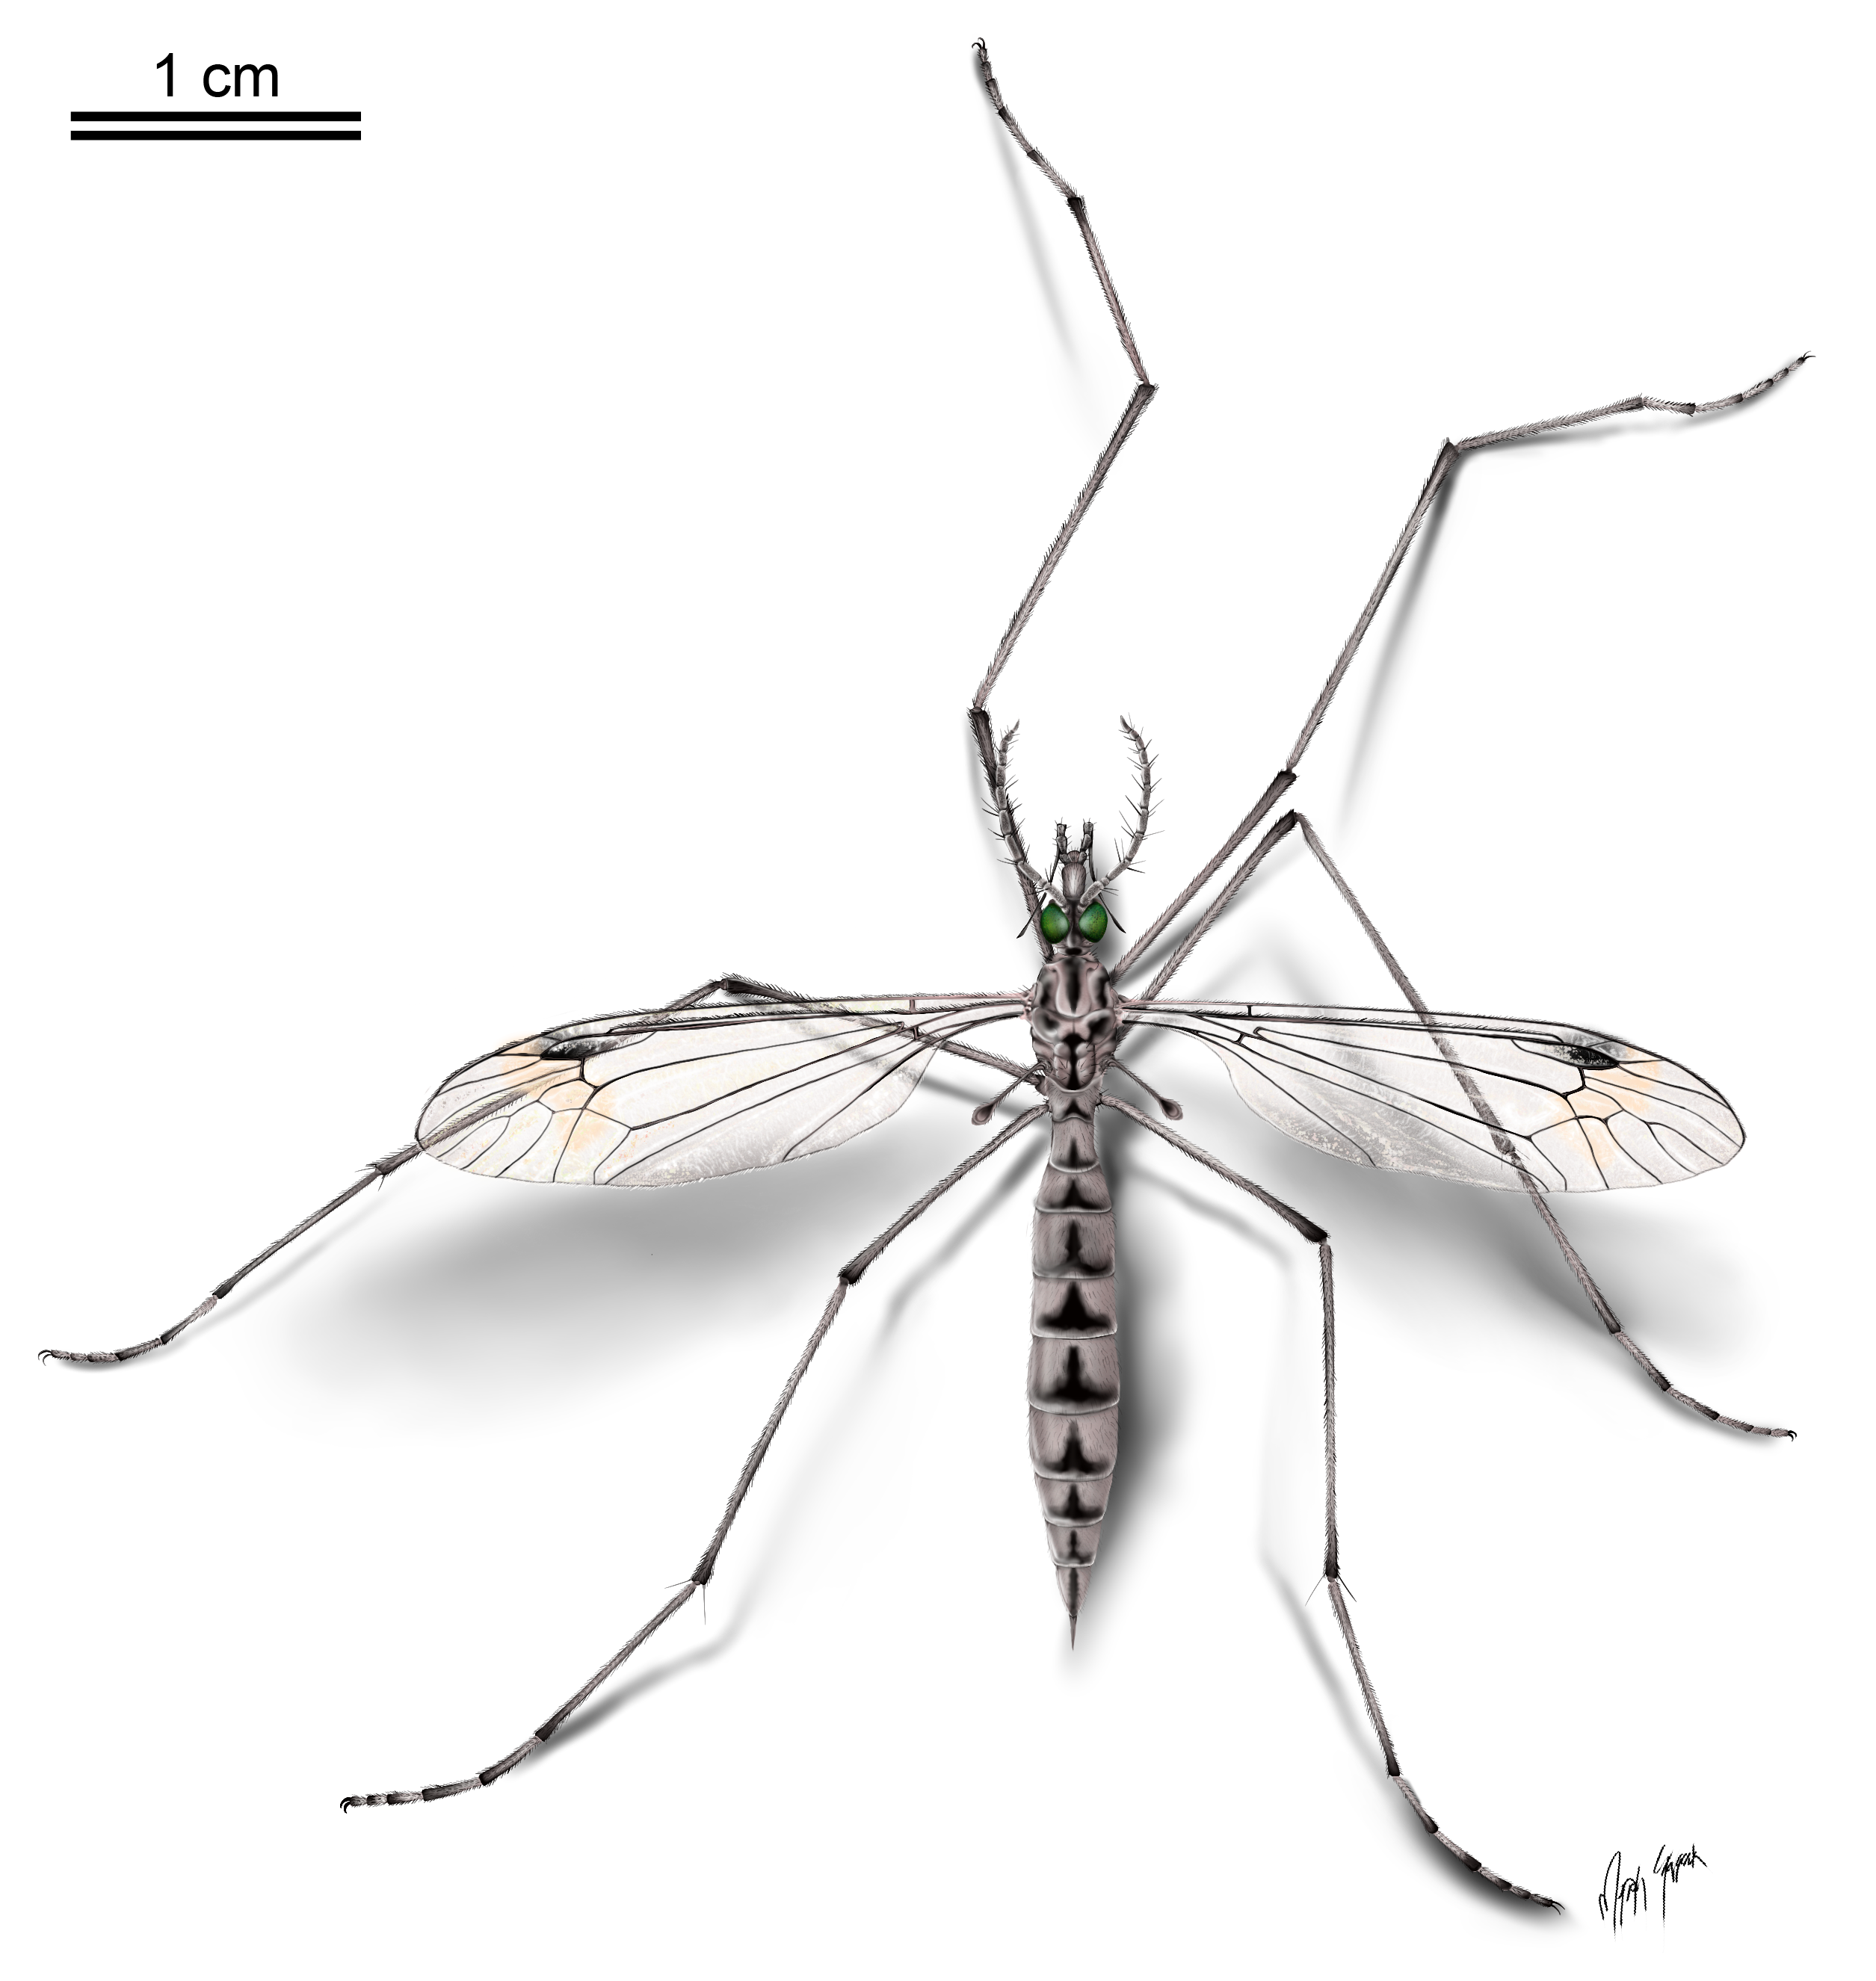 Artist reconstruction of grey and black crane fly on white background, letgs and wings are extended out.